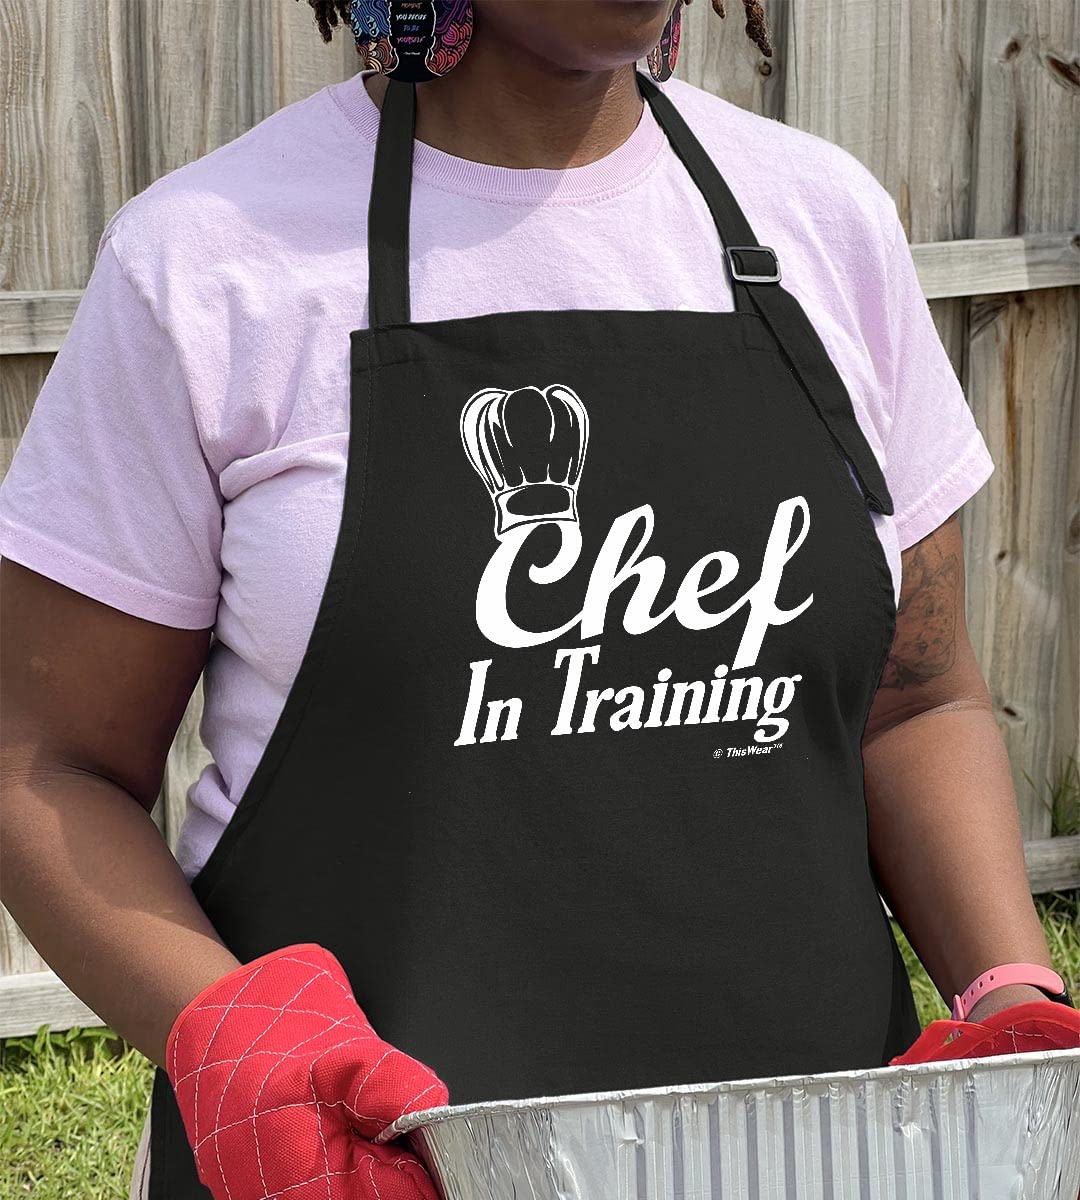 ThisWear Chef in Training Funny Apron for Kitchen Two Pocket Apron Black